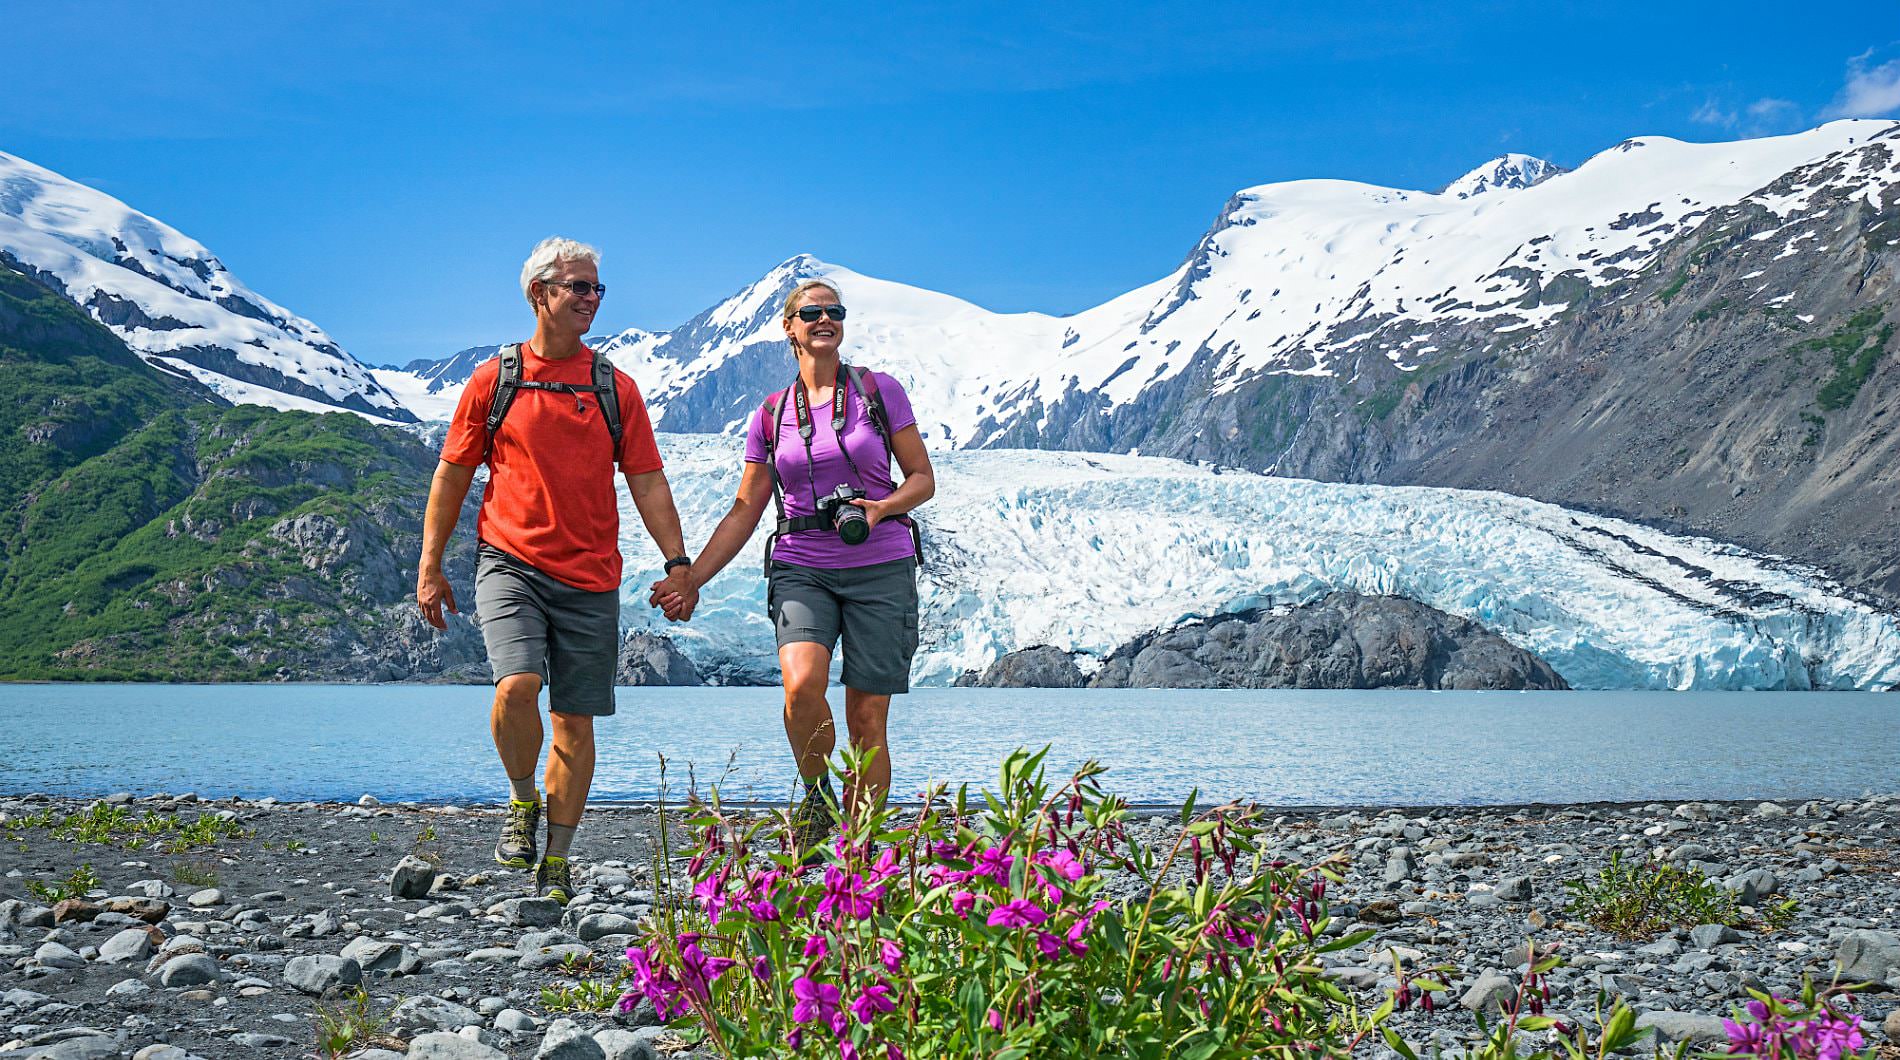 Summer Sightseeing Activities Day Tours & Cruises in Anchorage Alaska